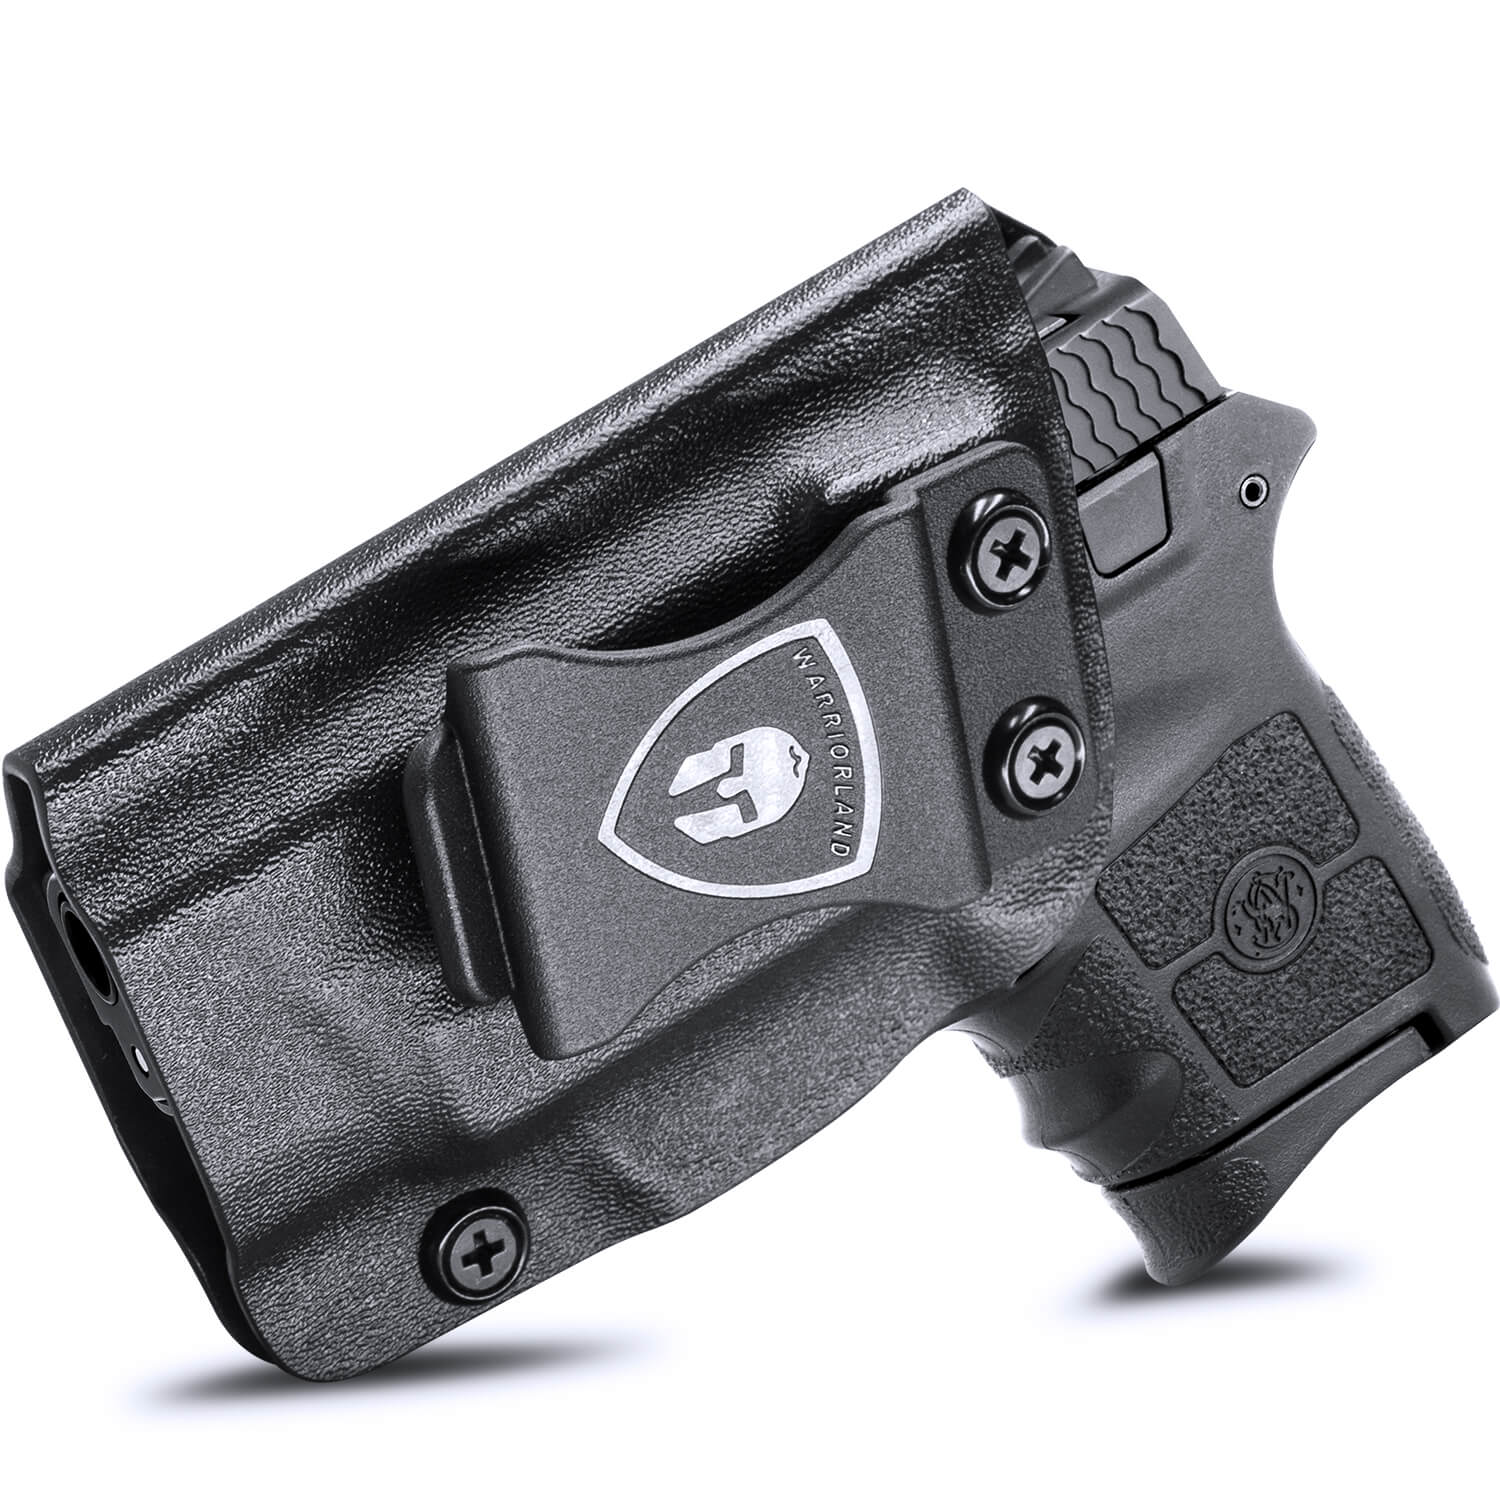 Kydex IWB Holster for Smith & Wesson S&W M&P Bodyguard 380 Integrated Laser Concealed Carry Right/ Left Handed | WARRIORLAND